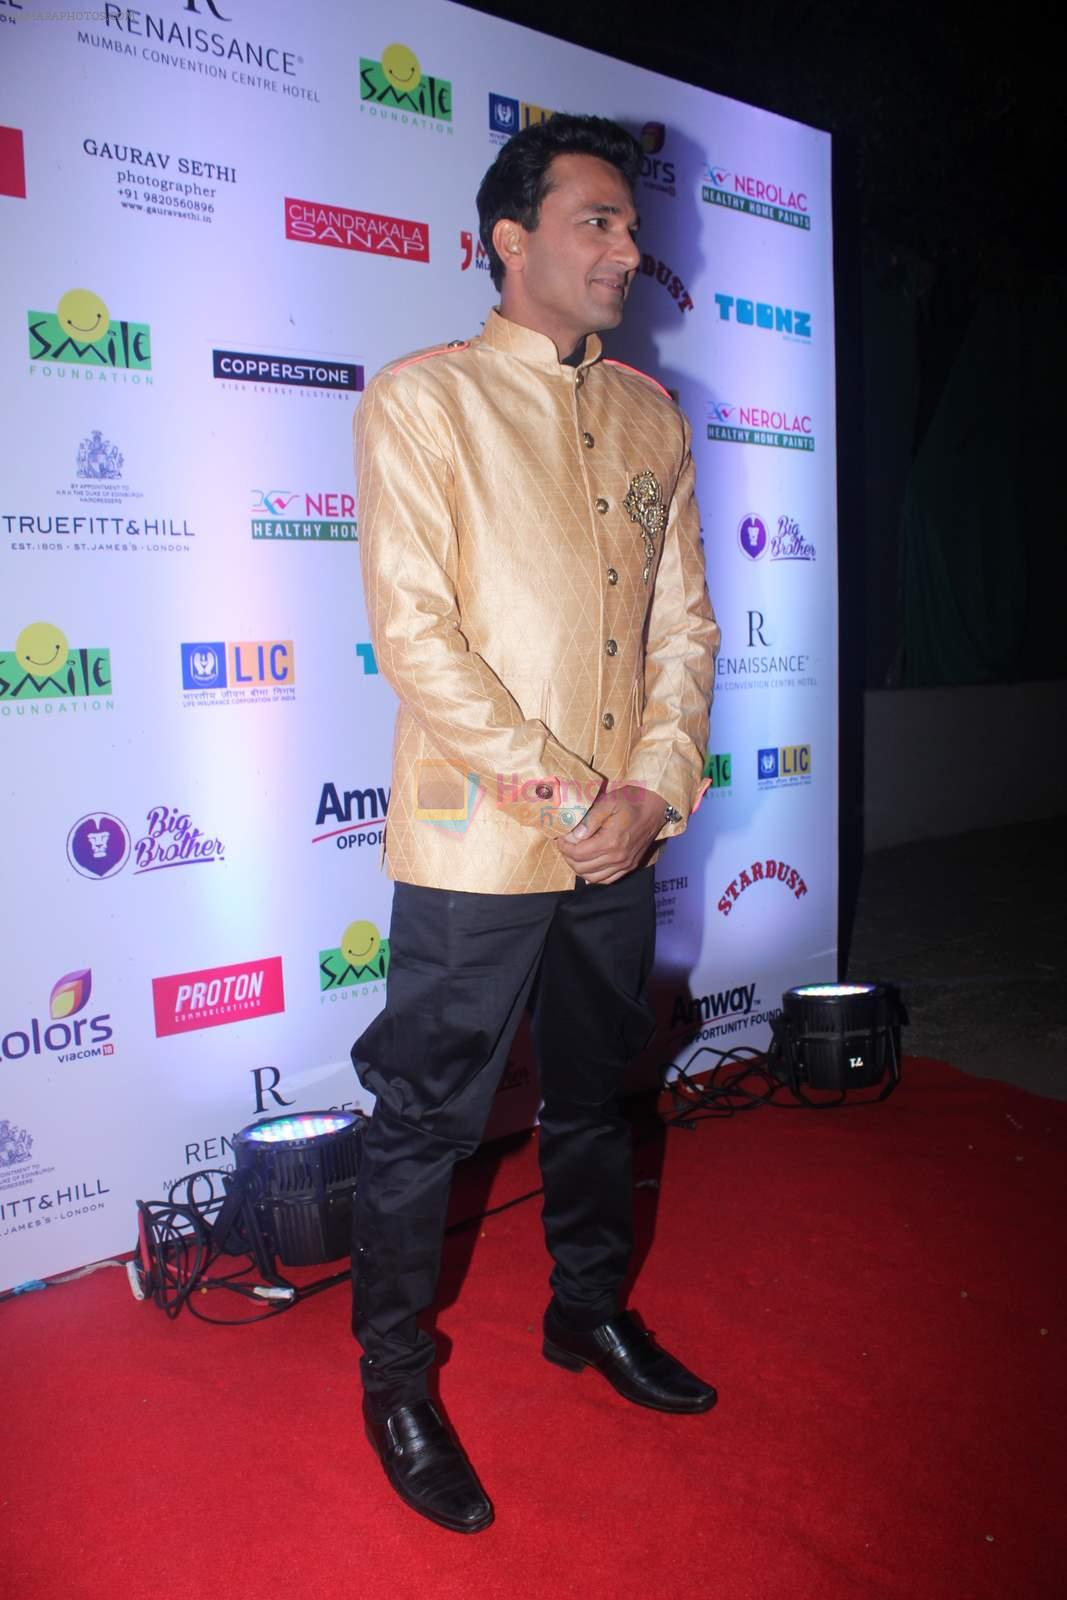 Vikas Khanna at Smile Foundation show with True Fitt & Hill styling in Rennaisance on 15th March 2015